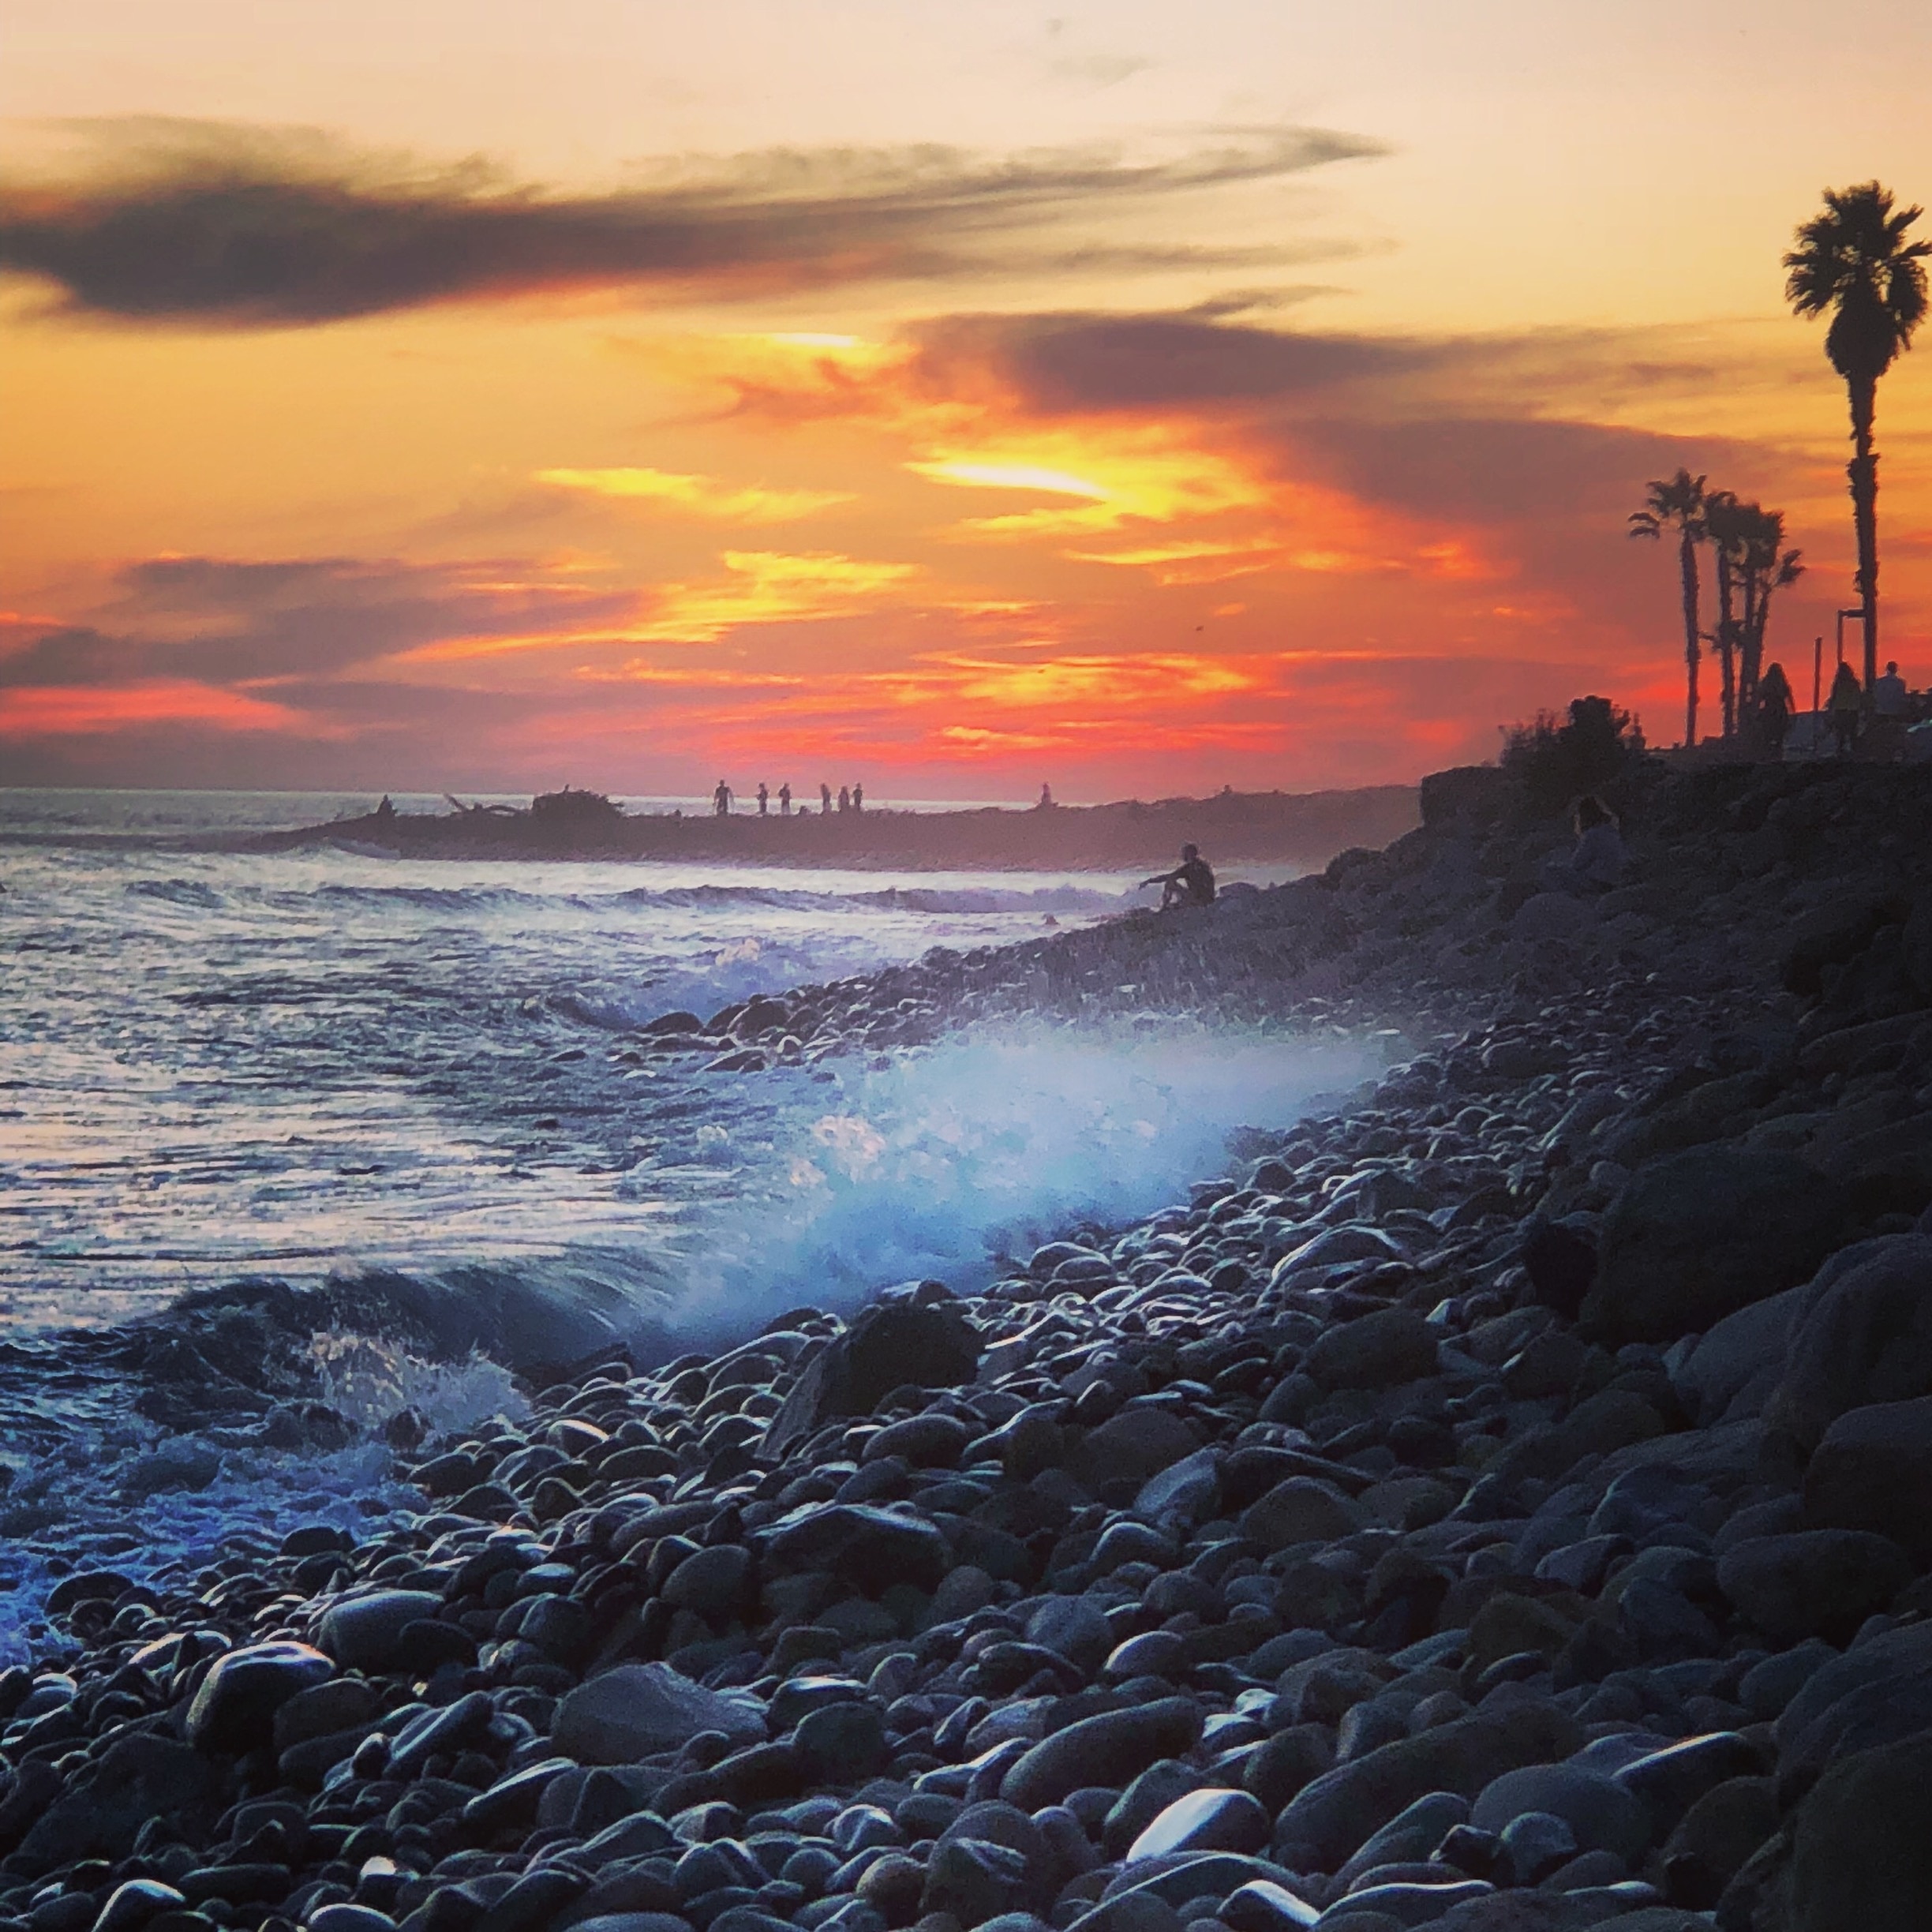 Ventura, CA. Rated as one of the happiest cities in United States to live in. I believe it is due to the fabulous surf conditions, the sound of the sea upon the shore and the incredible sunsets. 